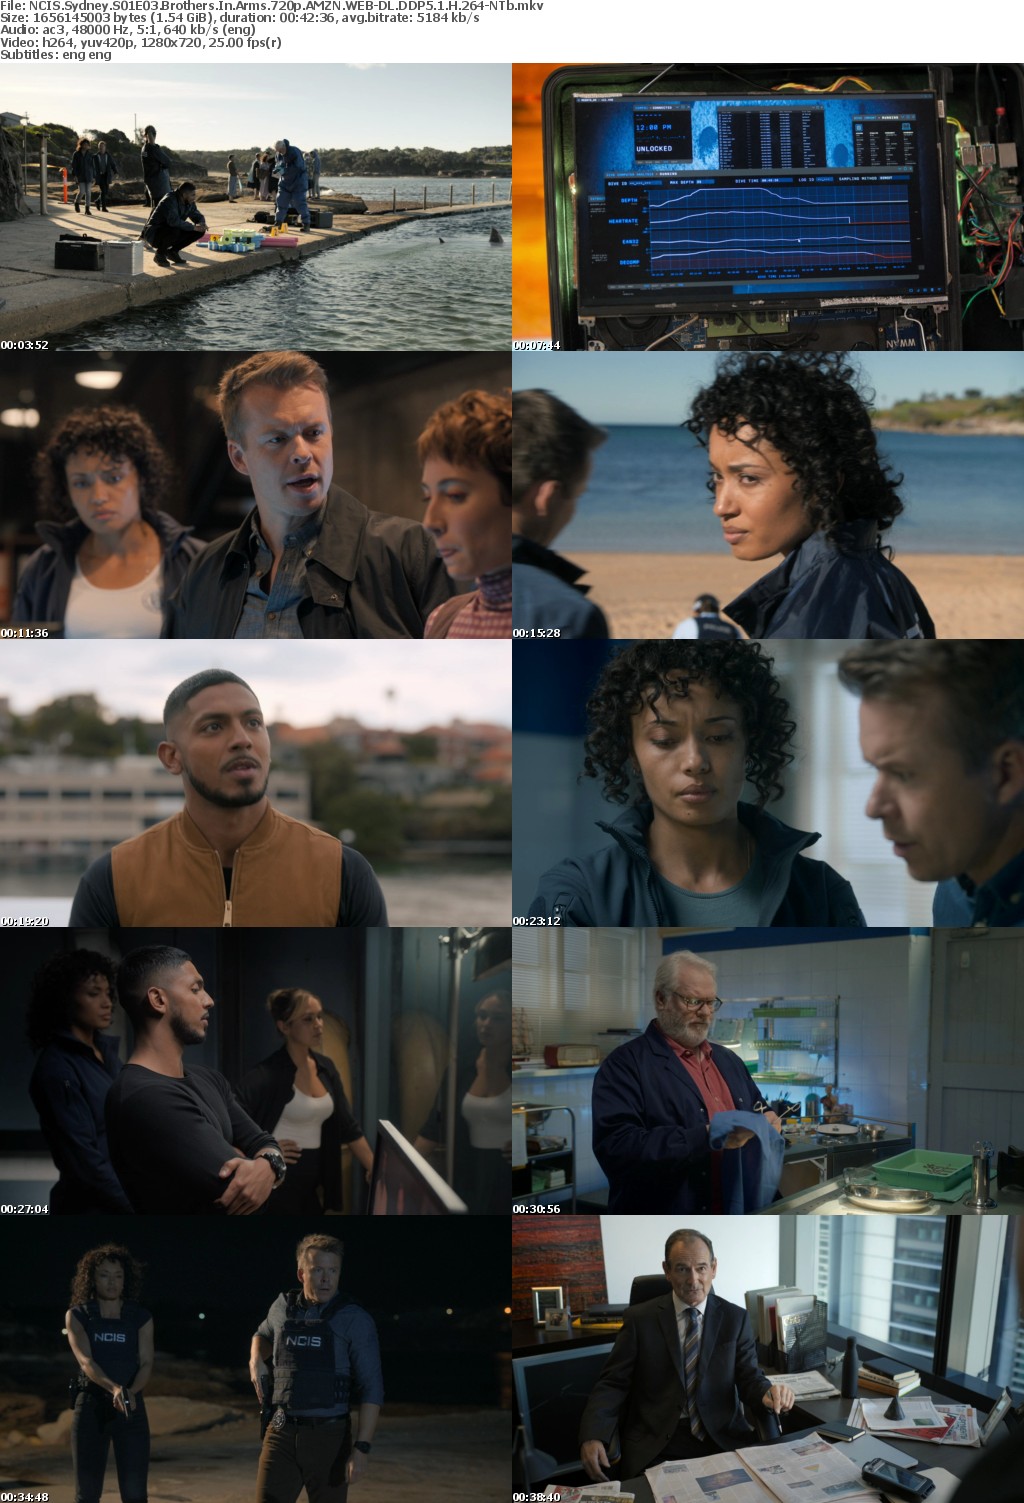 NCIS Sydney S01E03 Brothers In Arms 720p AMZN WEB-DL DDP5 1 H 264-NTb